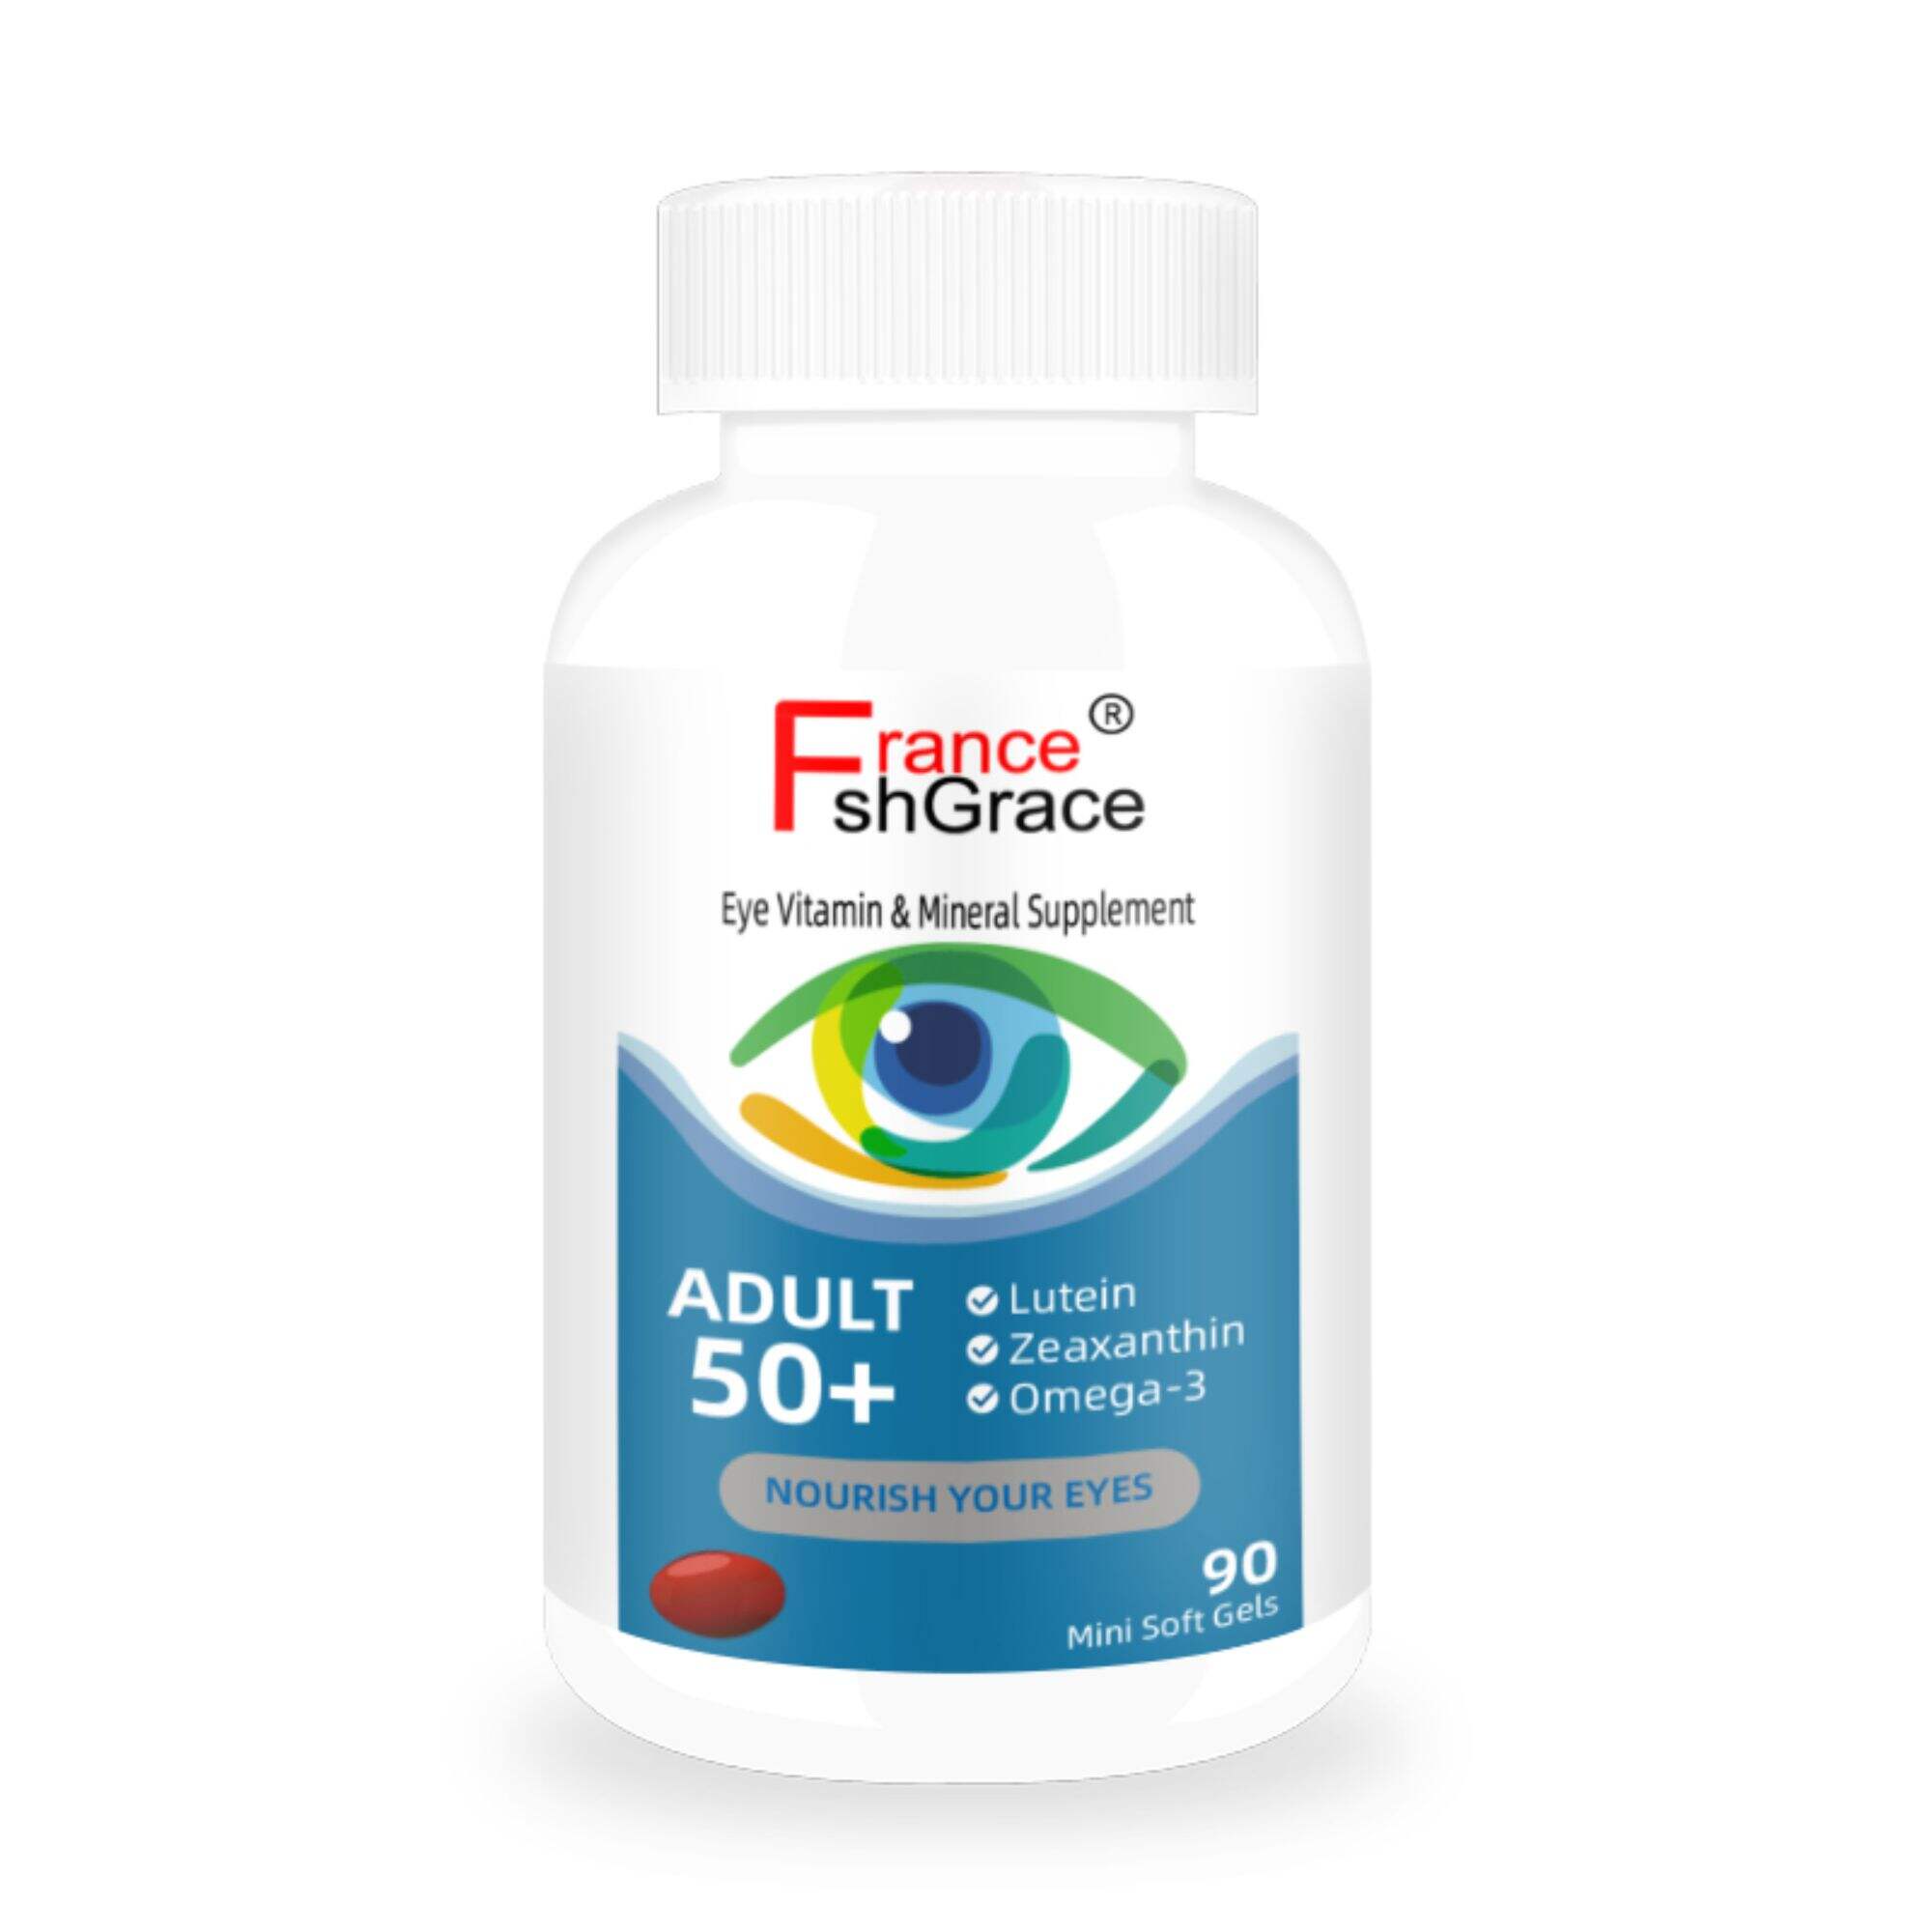 Eye Vitamin & Mineral Supplement, Contains Zinc, Vitamins C, E, Omega 3, Lutein, & Zeaxanthin, 90 Softgels